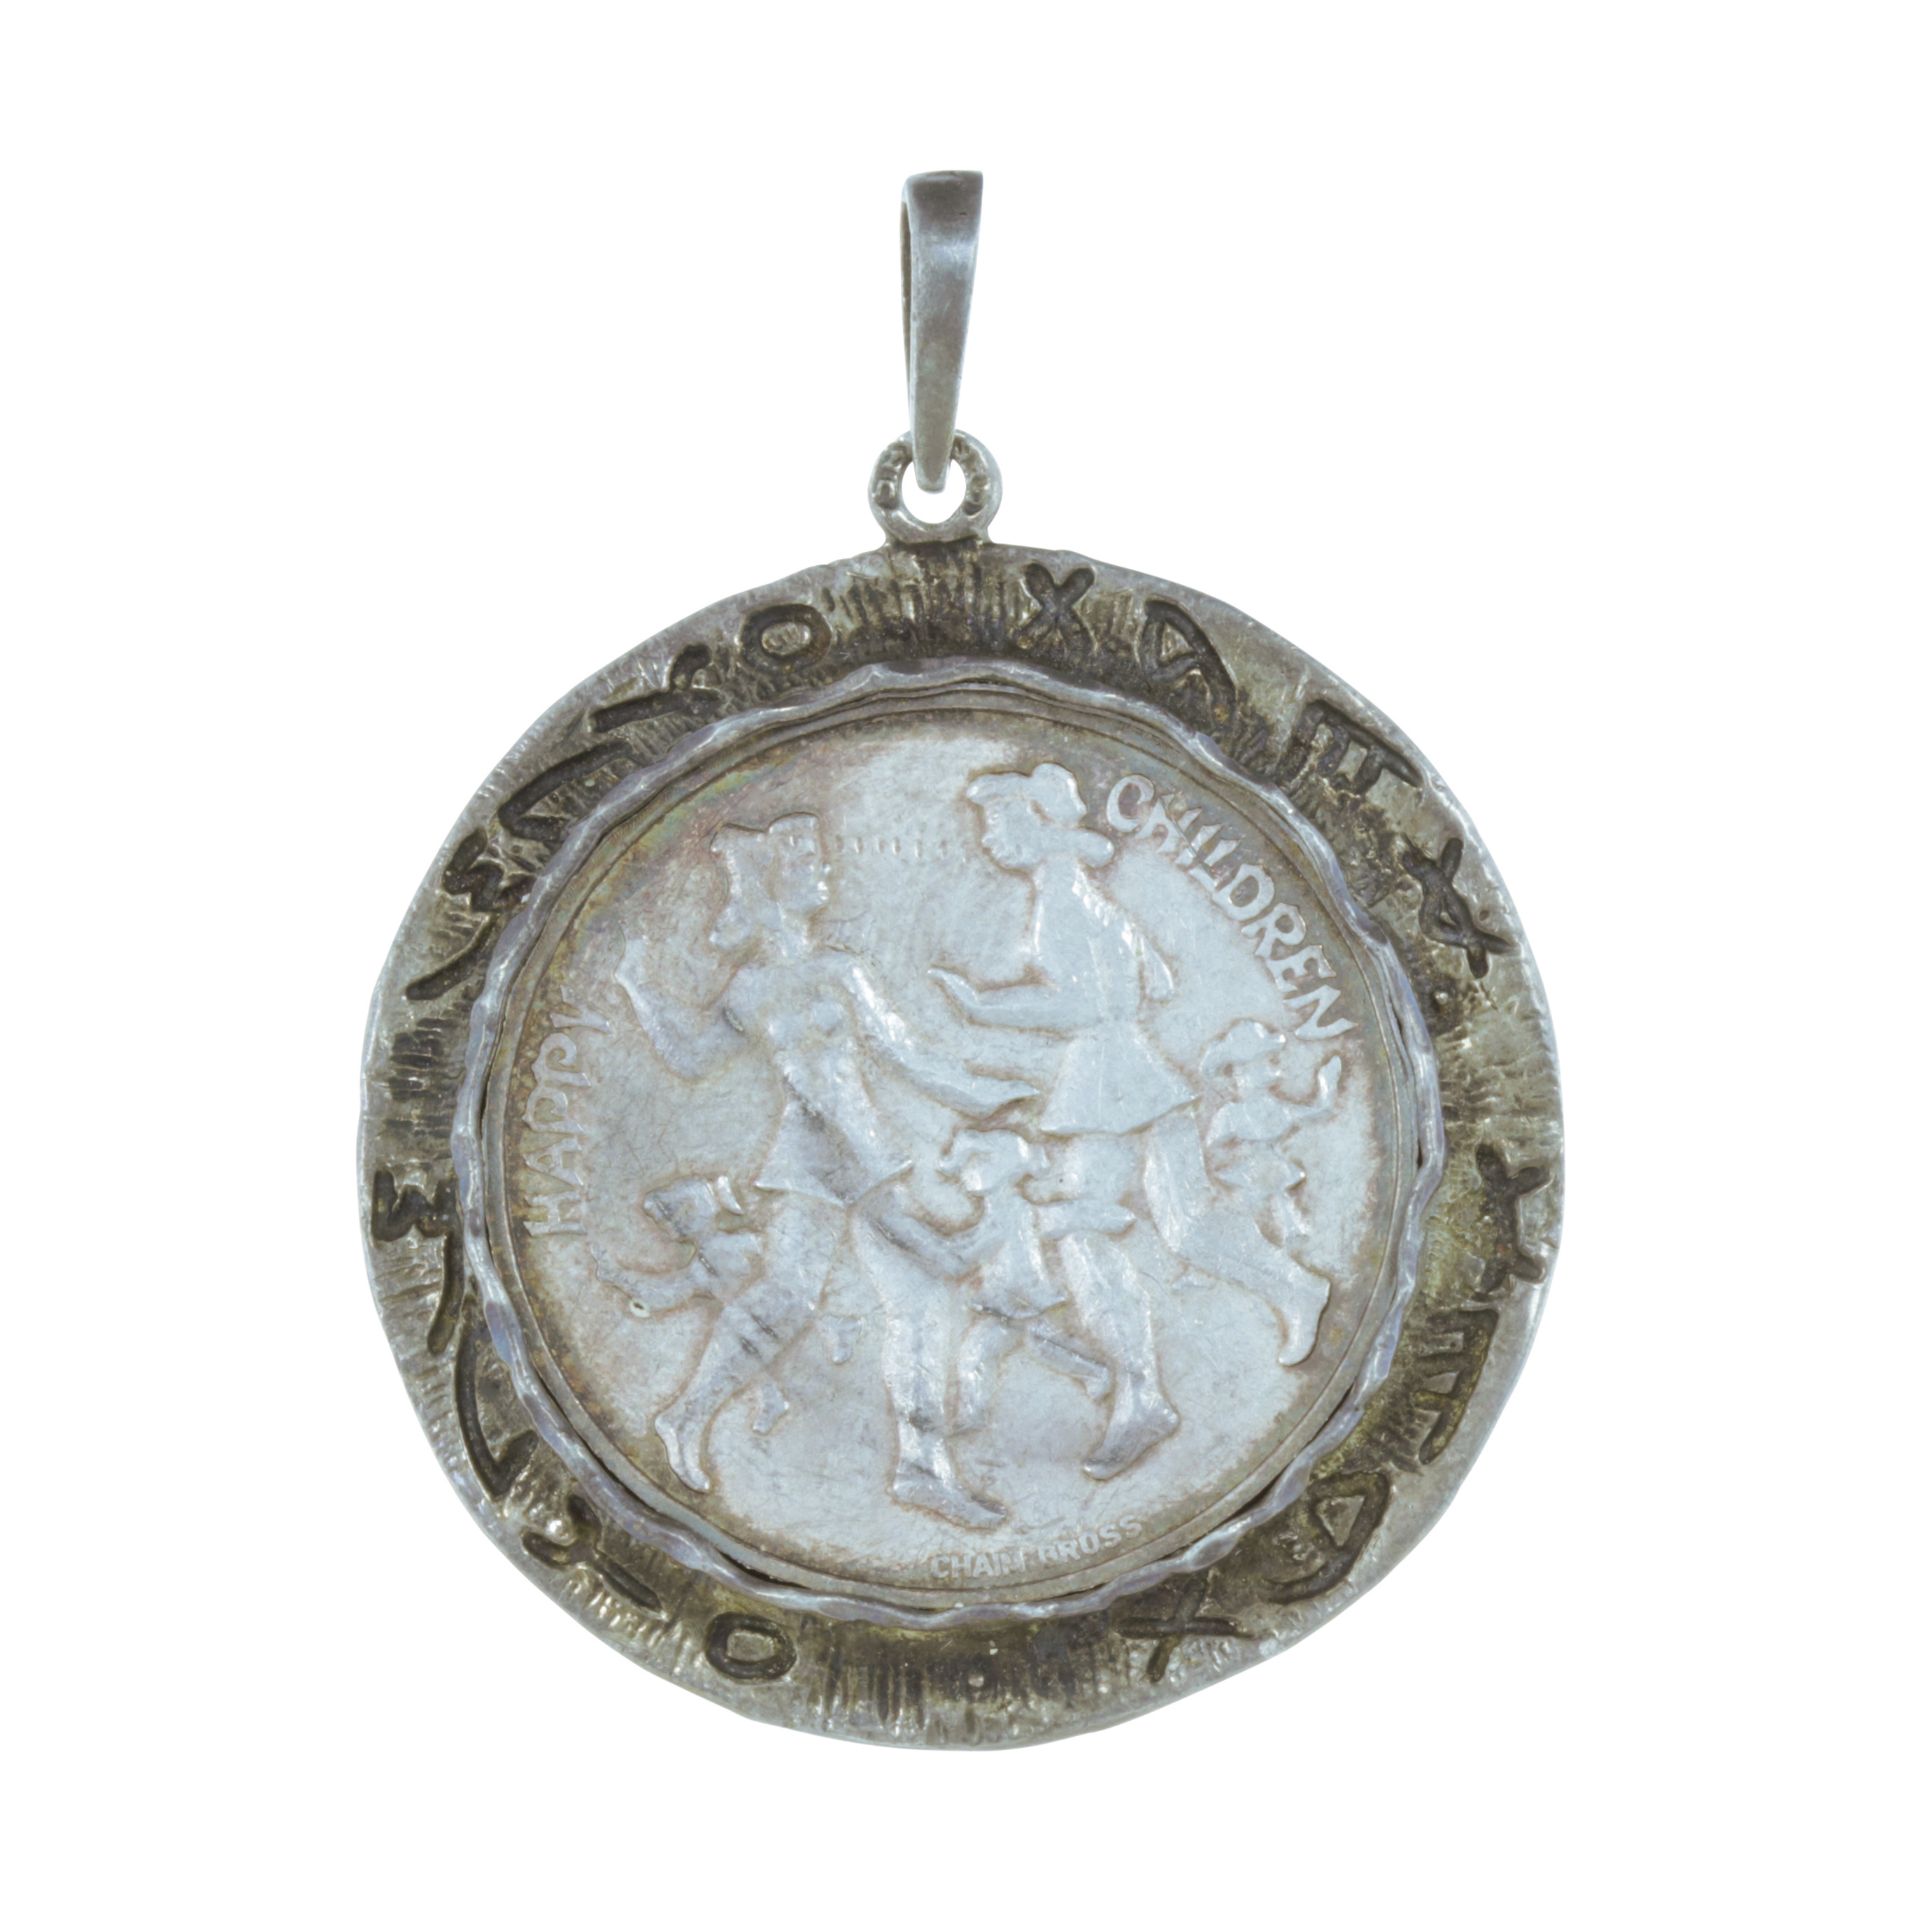 AN ENAMELED SILVER JUDAICA PENDANT of circular form with enameled flowers to the front surrounded by - Image 2 of 2